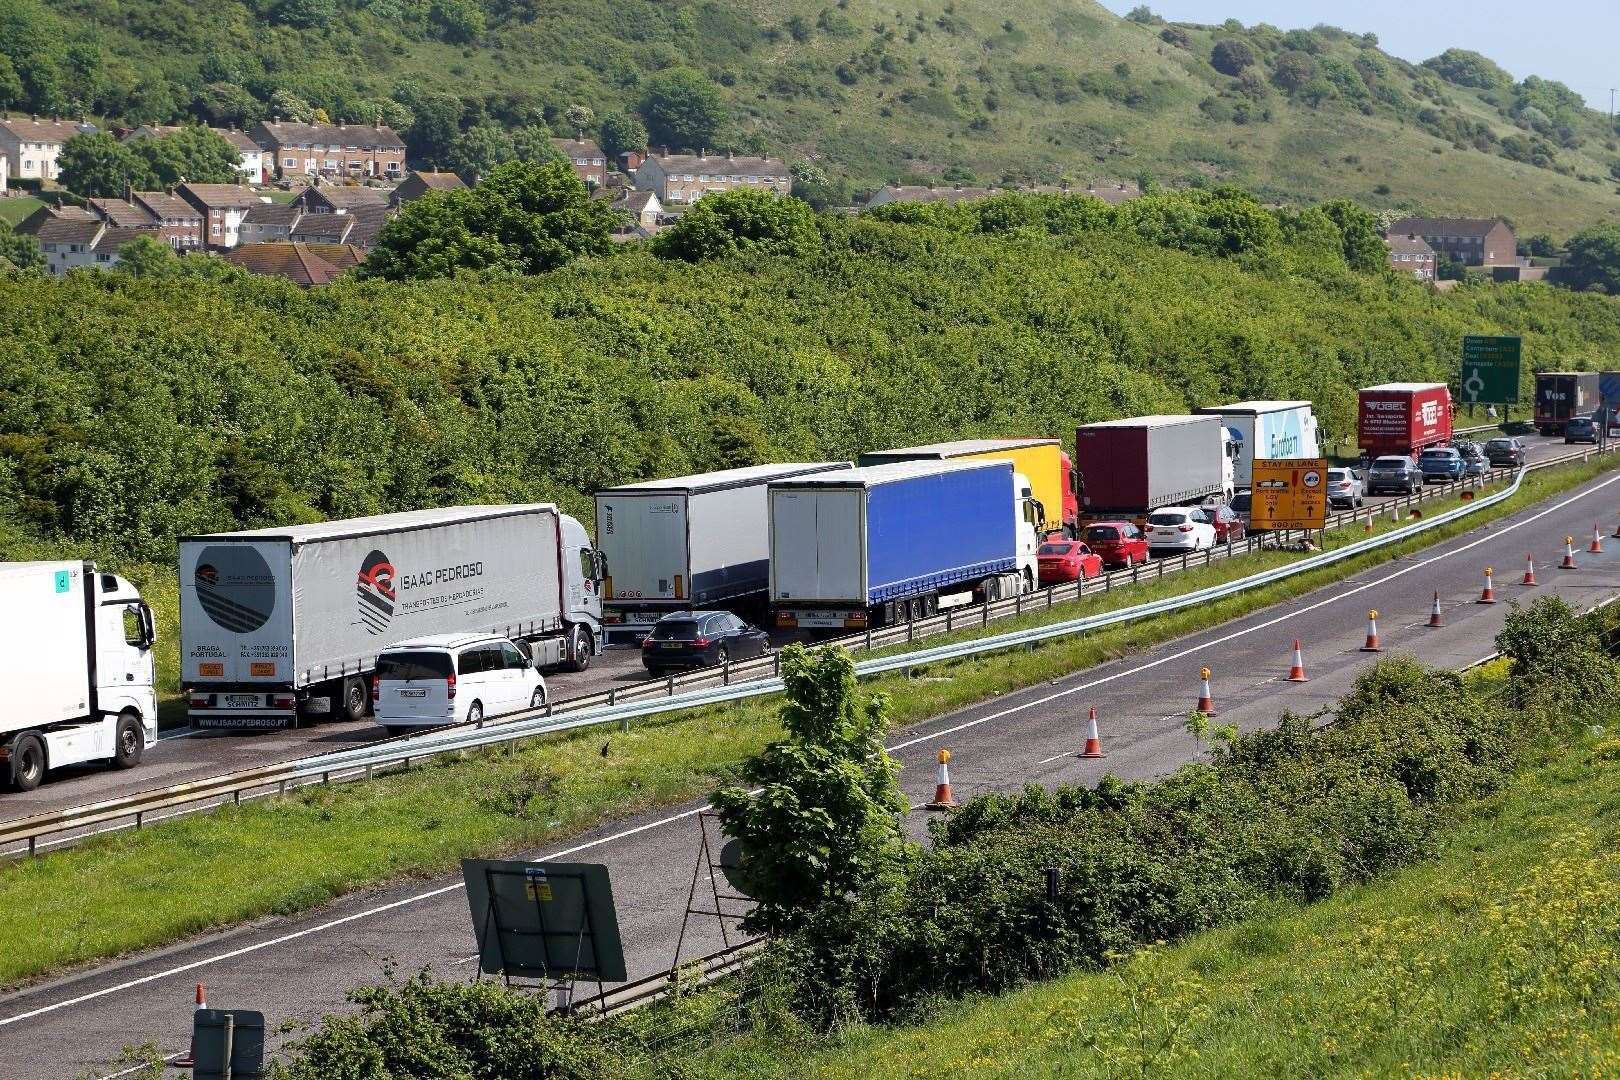 Lorries queued up on the A20 near Aycliffe during Dover TAP. Picture: Roger Golding